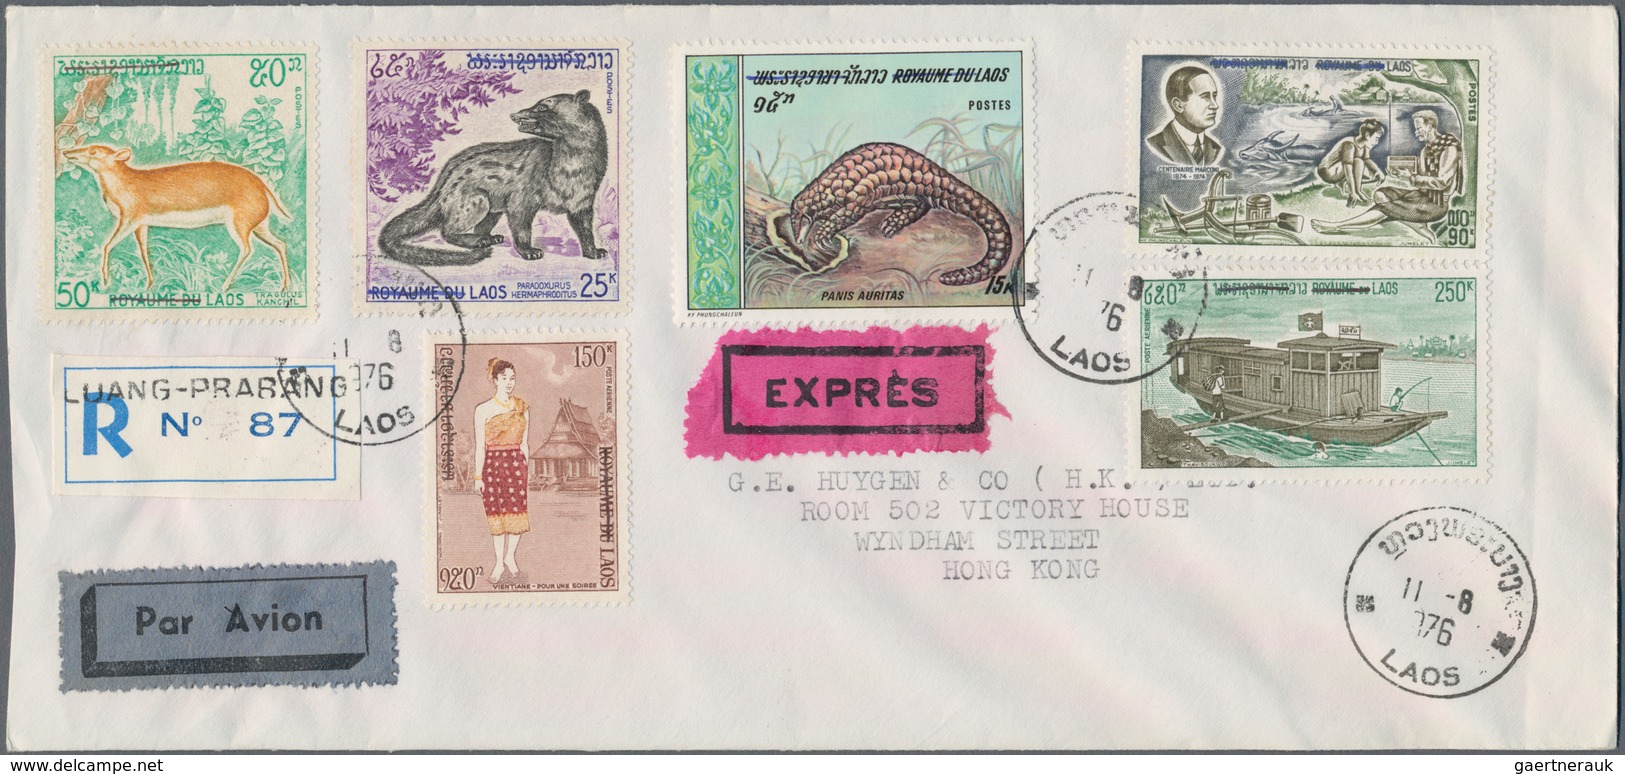 Laos: 1948/2001, holding of apprx. 228 covers incl. commercial and philatelic mail/f.d.c., many nice